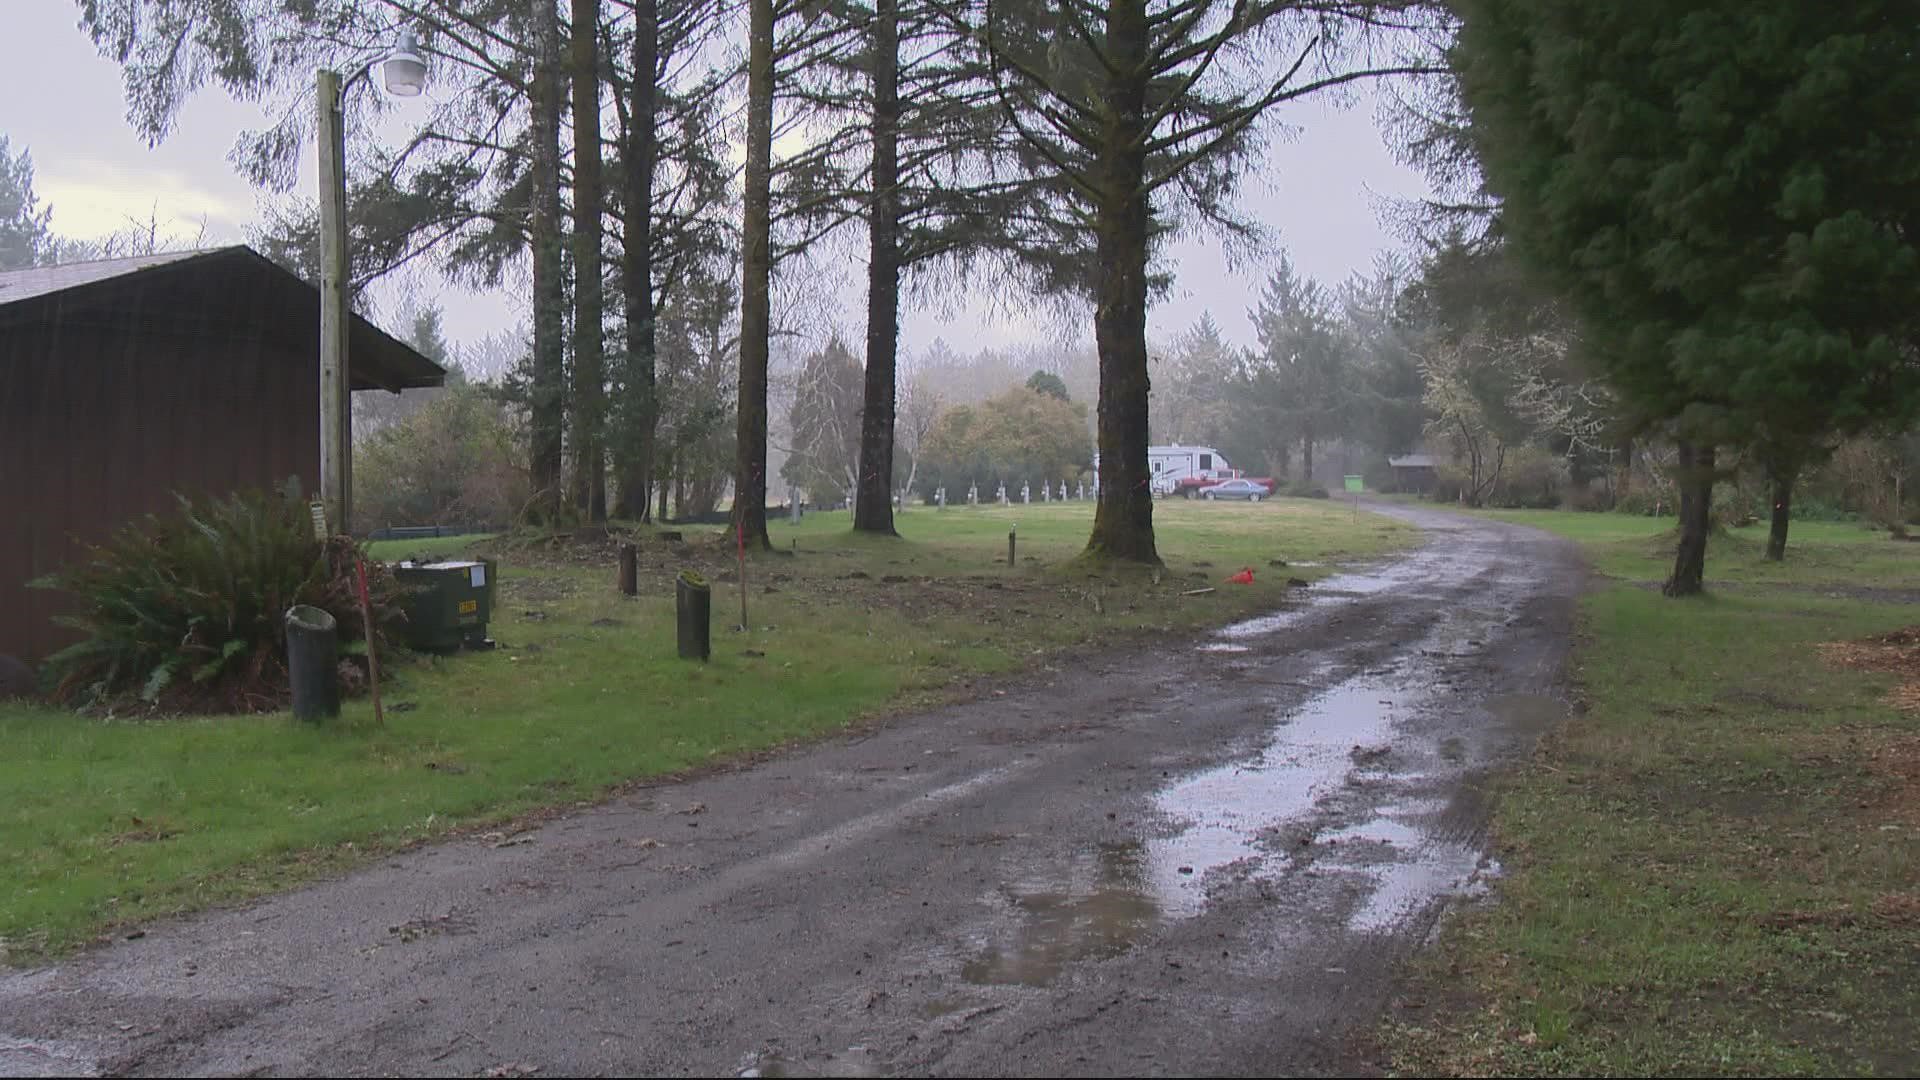 An outdoor lifestyle company is creating a new kind of camping experience in Long Beach, Washington. KGW's Tim Gordon reports.